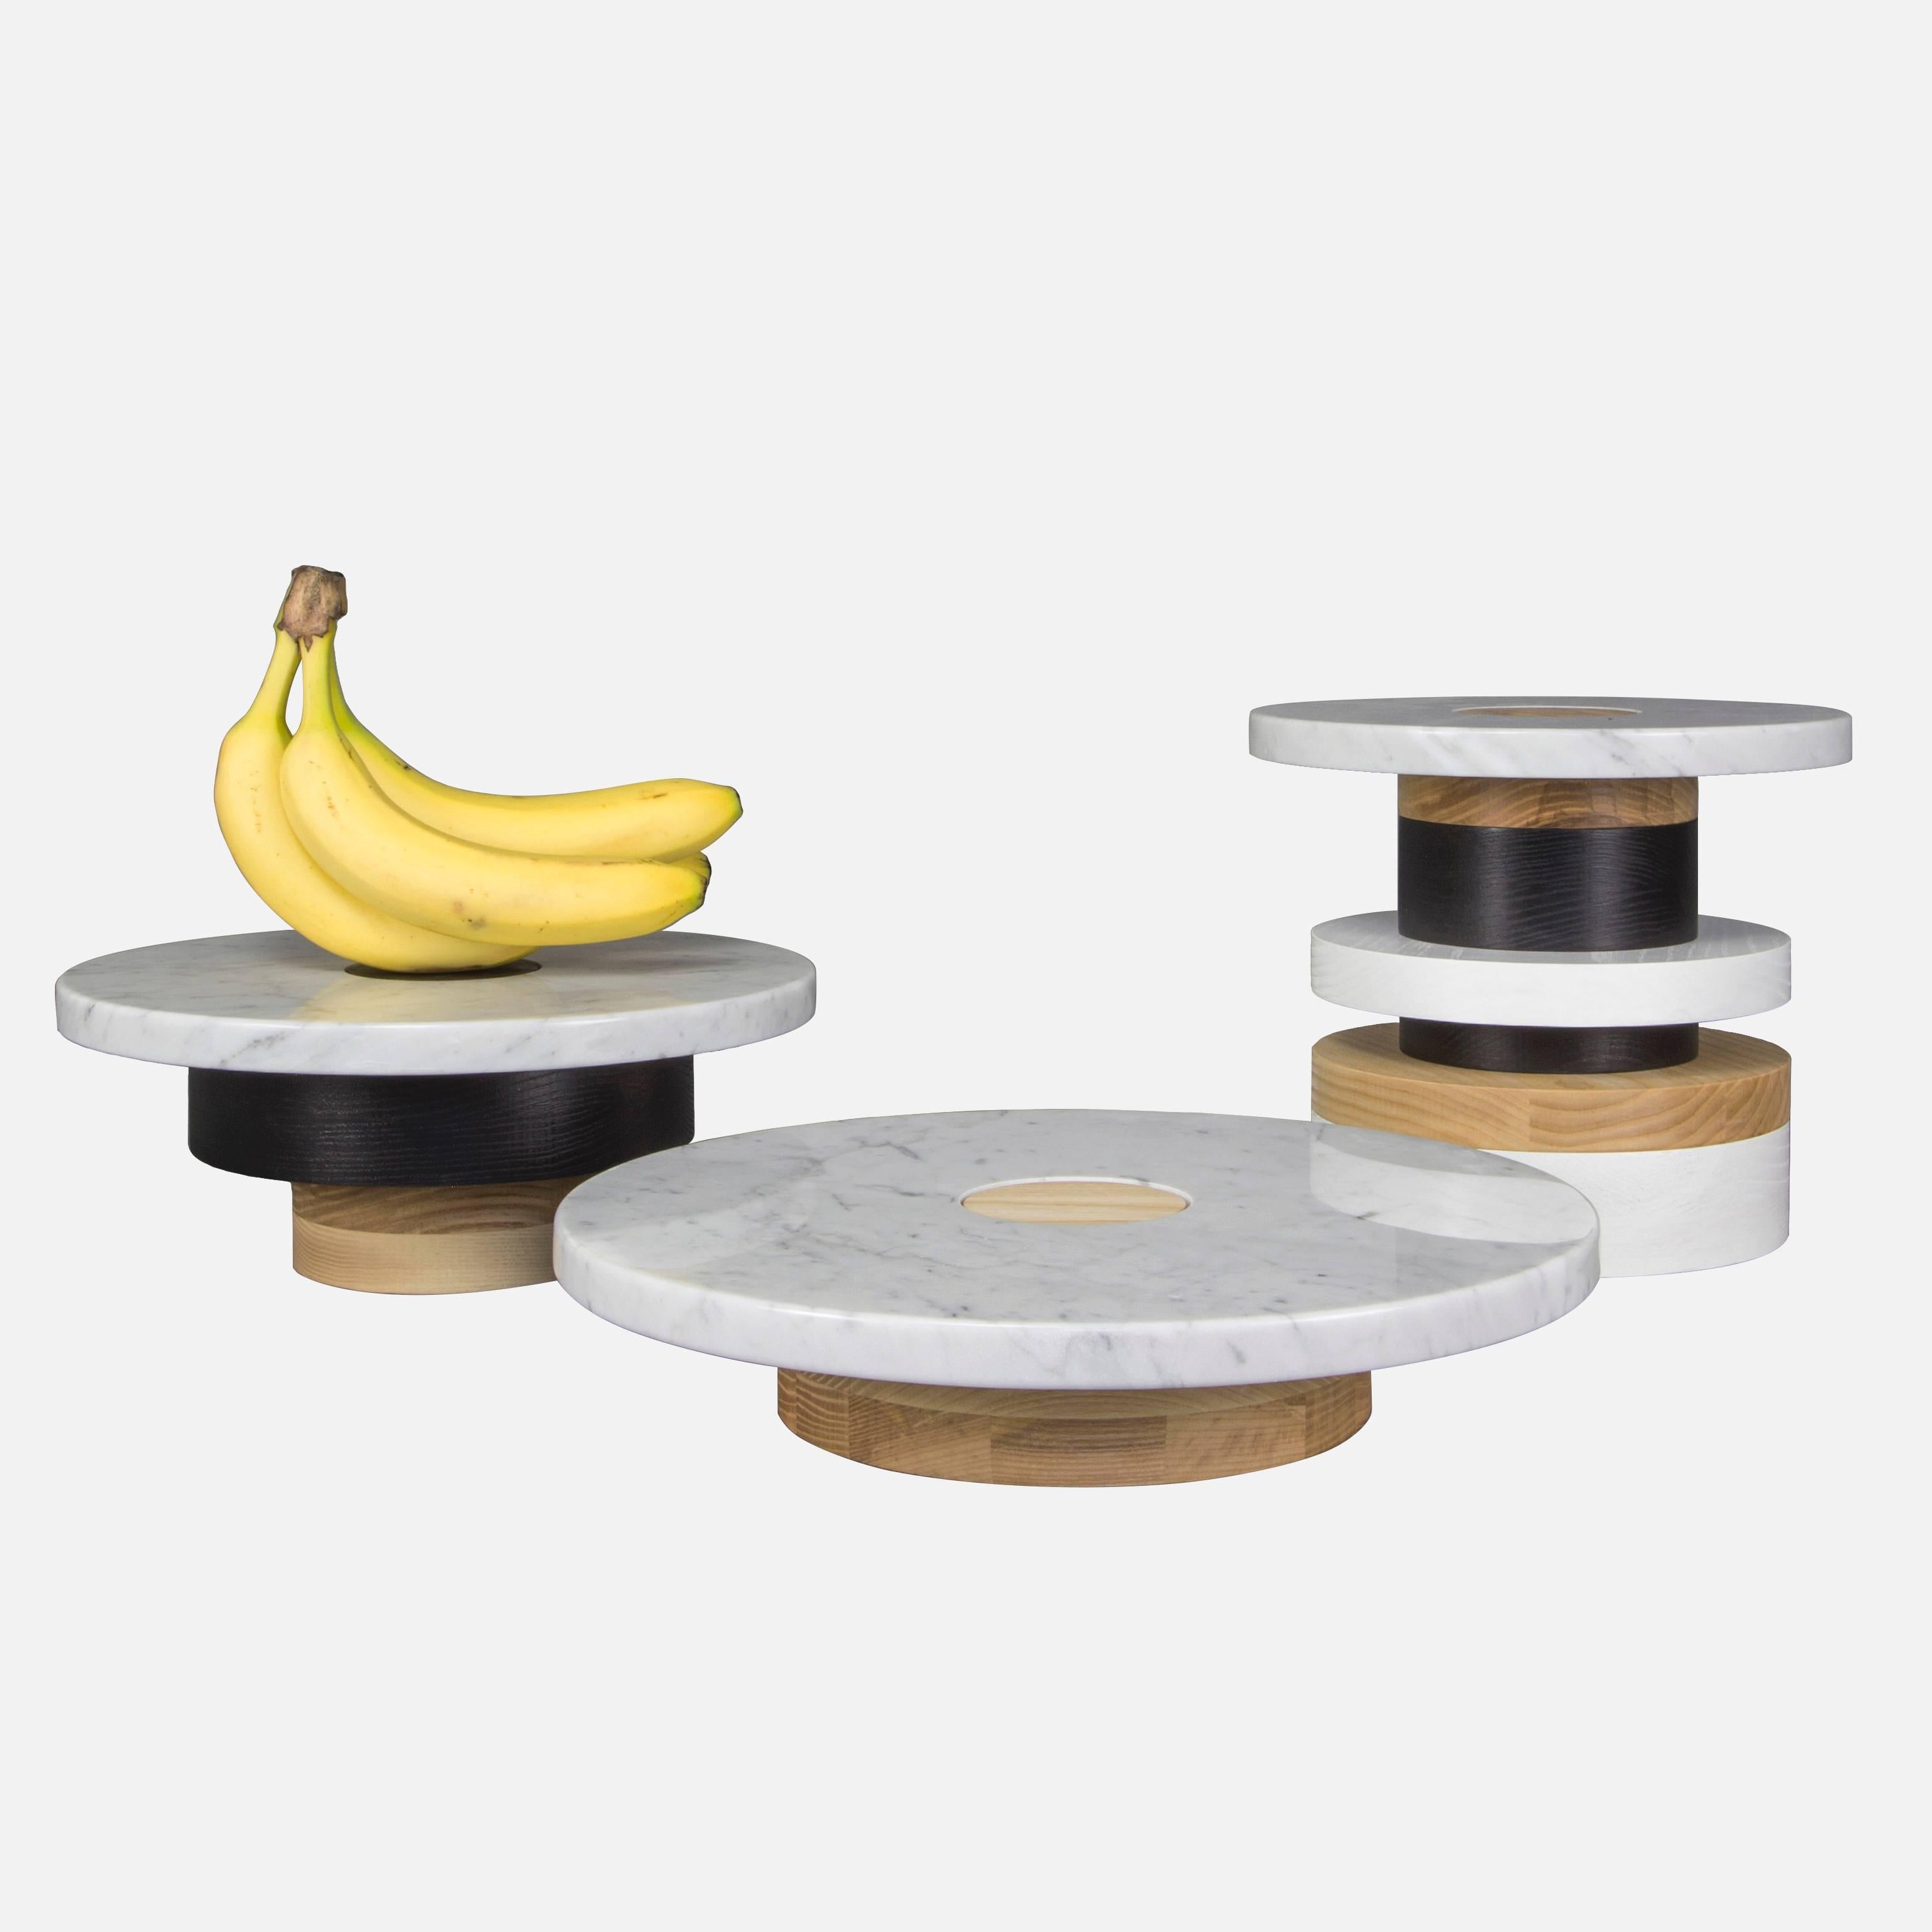 Oiled Set of Three Sass Pedestals from Souda, in stock